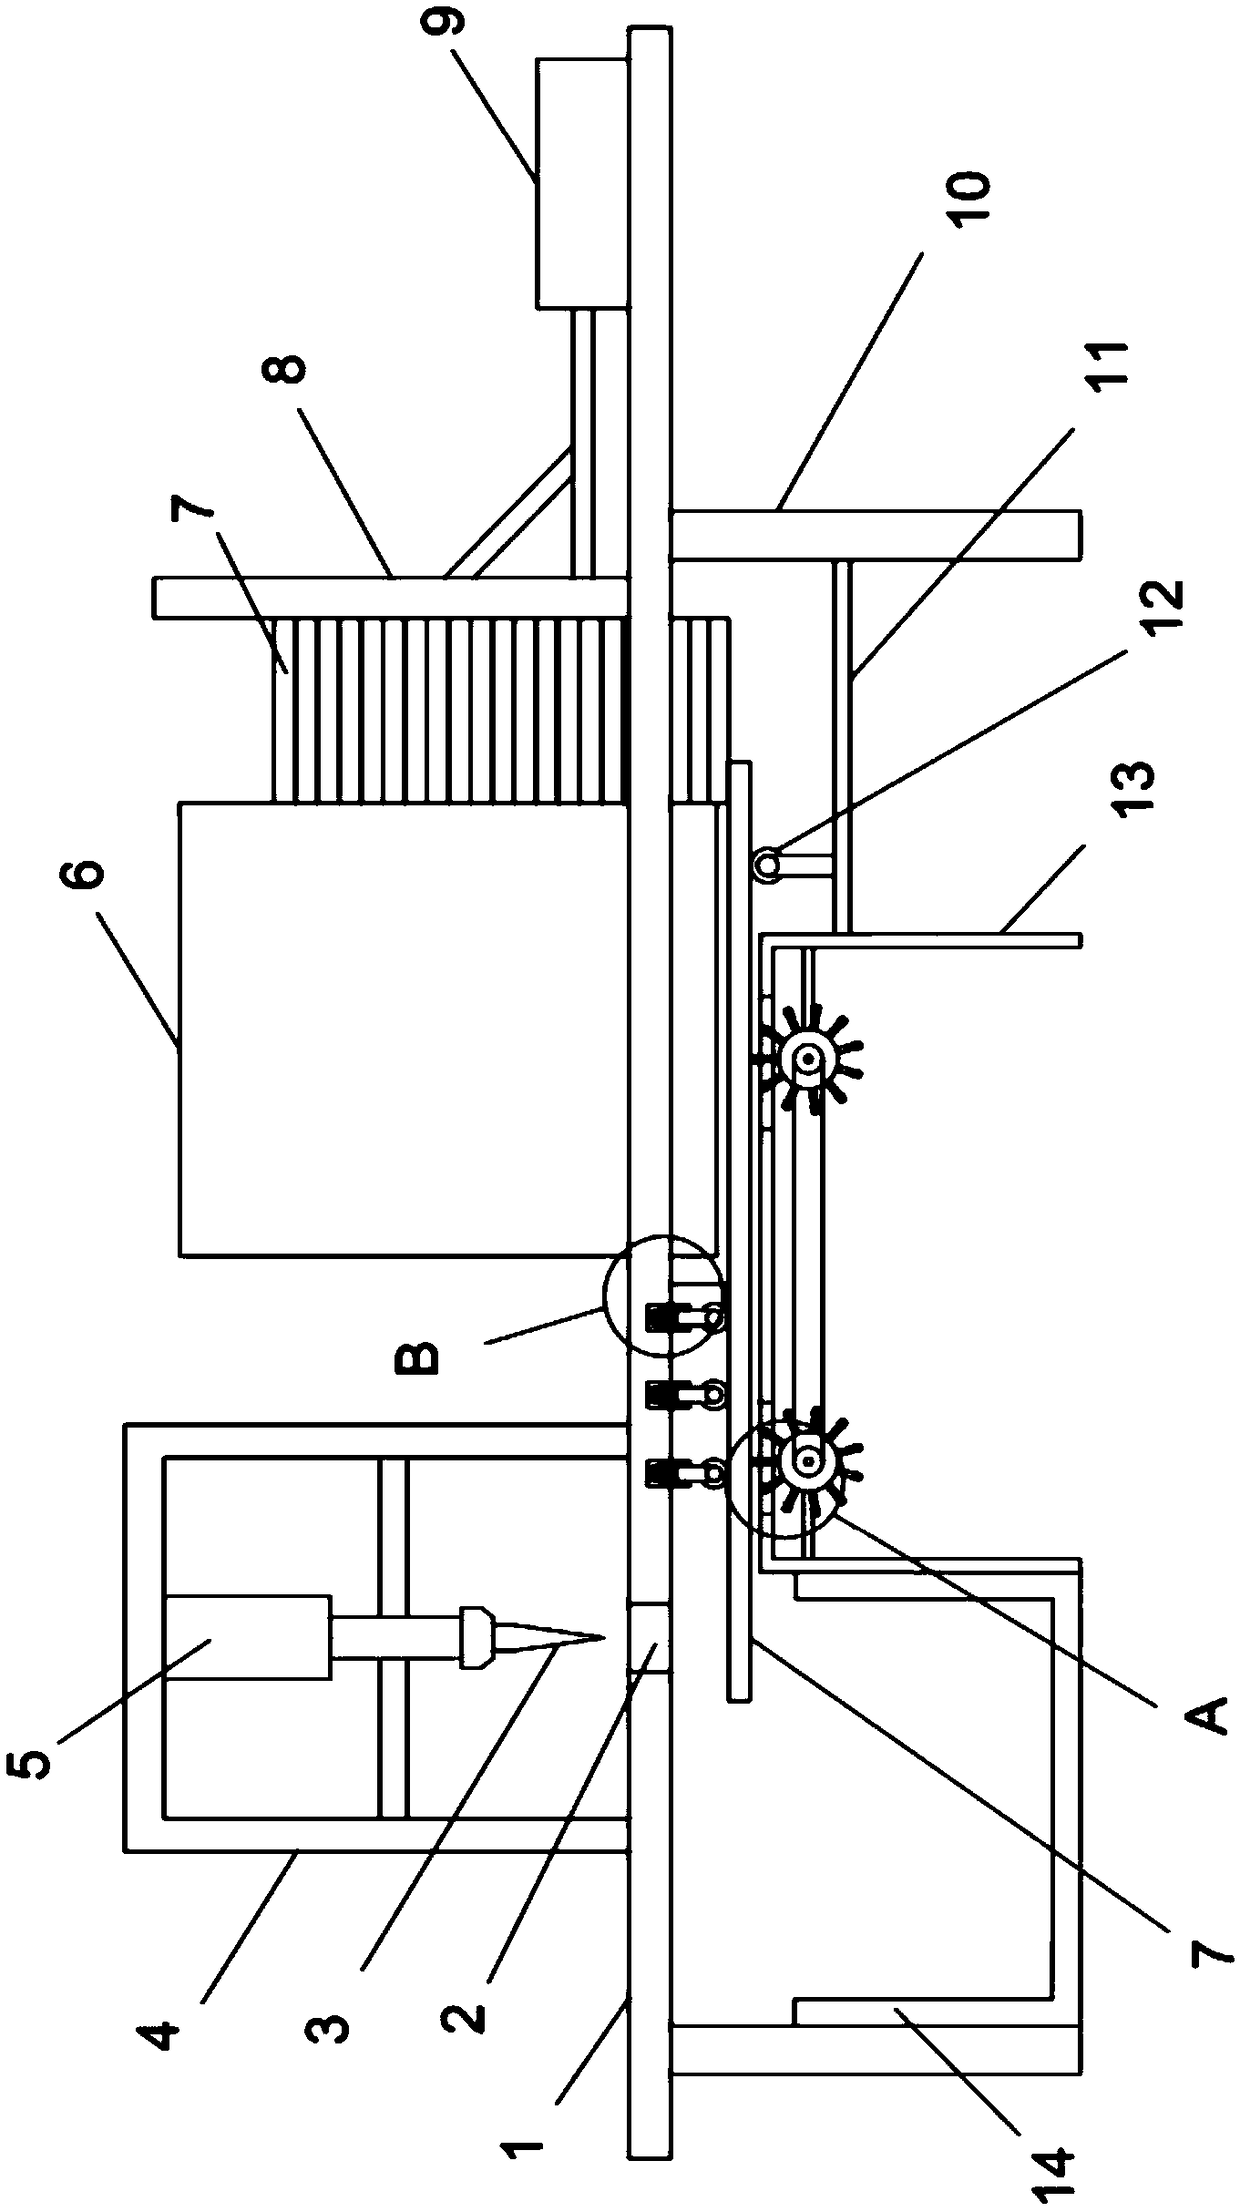 Sugarcane cutting and segmentation device for food processing